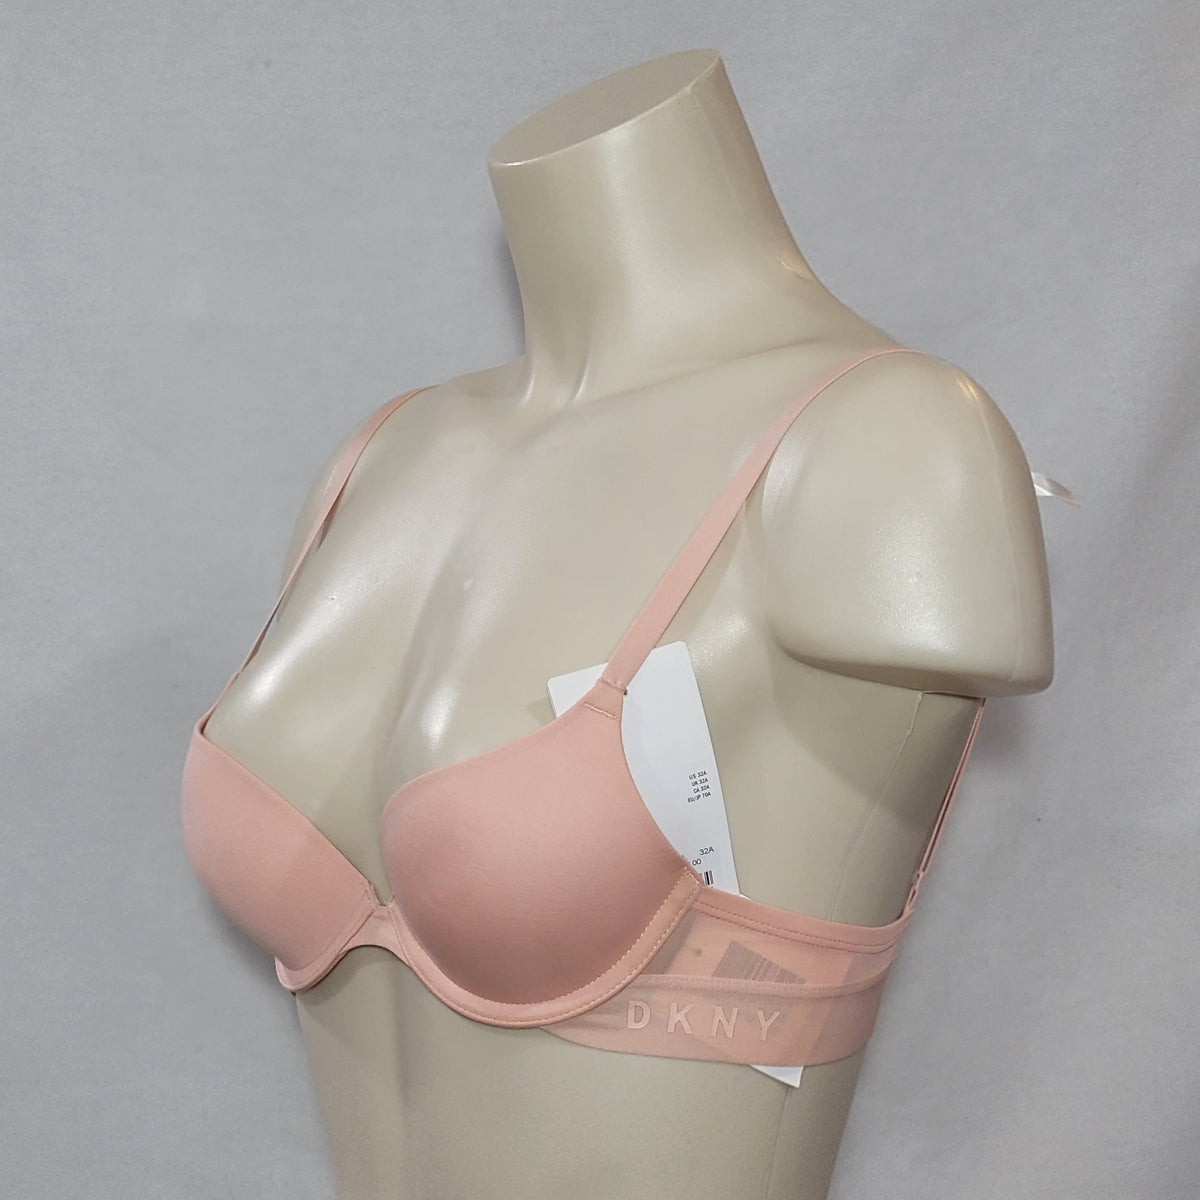 NEW DKNY Signature Lace Unlined Demi Bra 451000 Floral Pink 32B